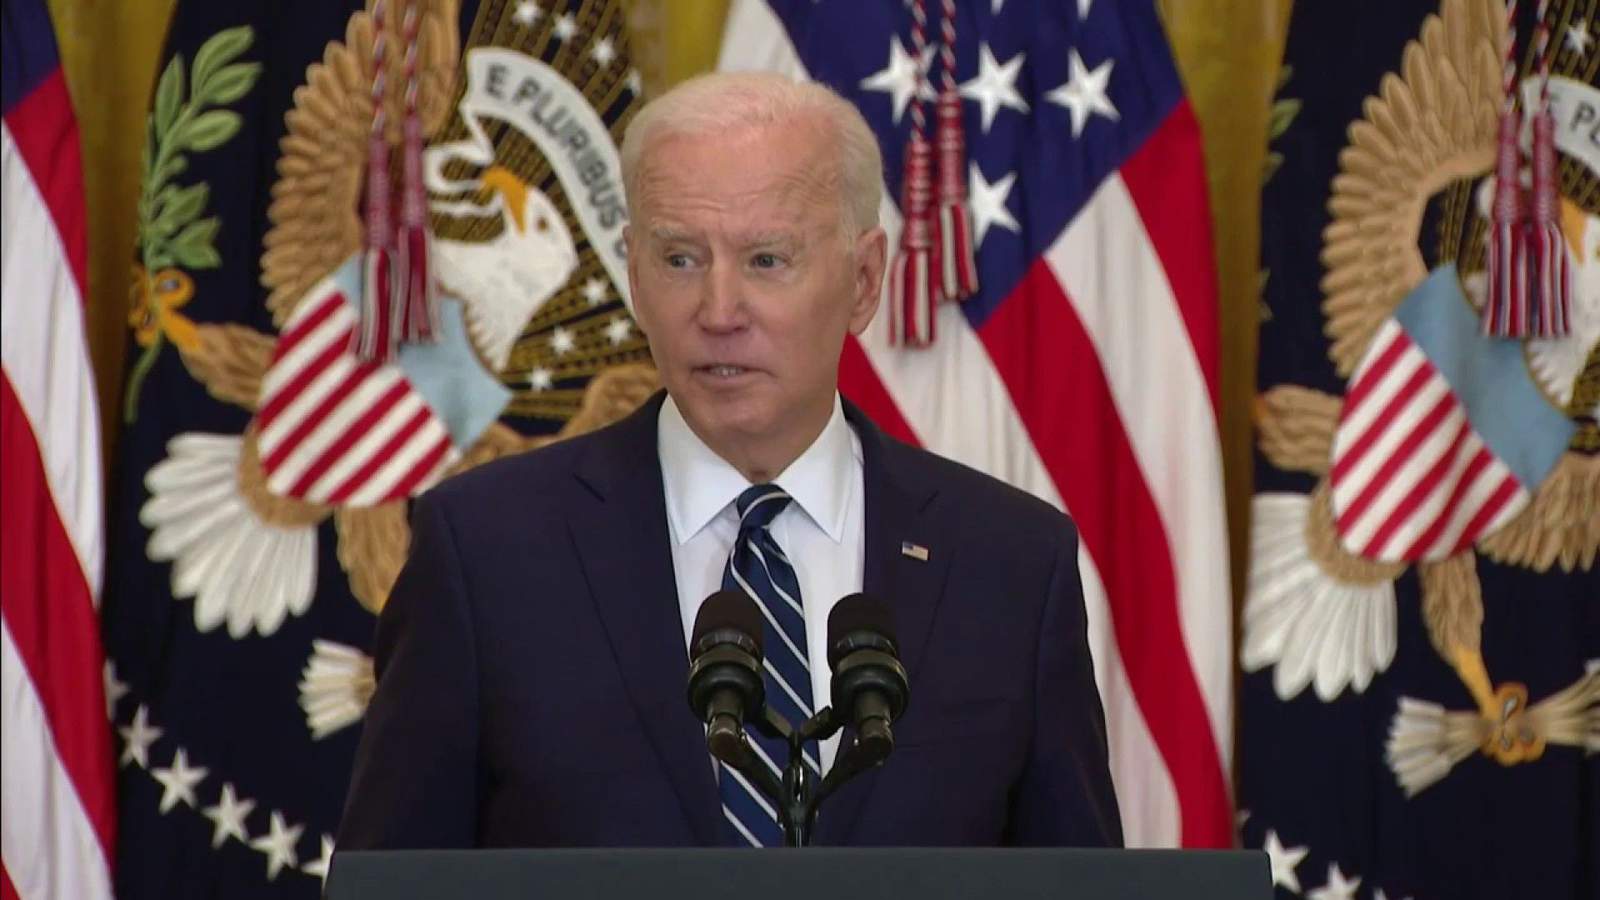 Biden addresses coronavirus, North Korea, border crisis and reelection in first news conference